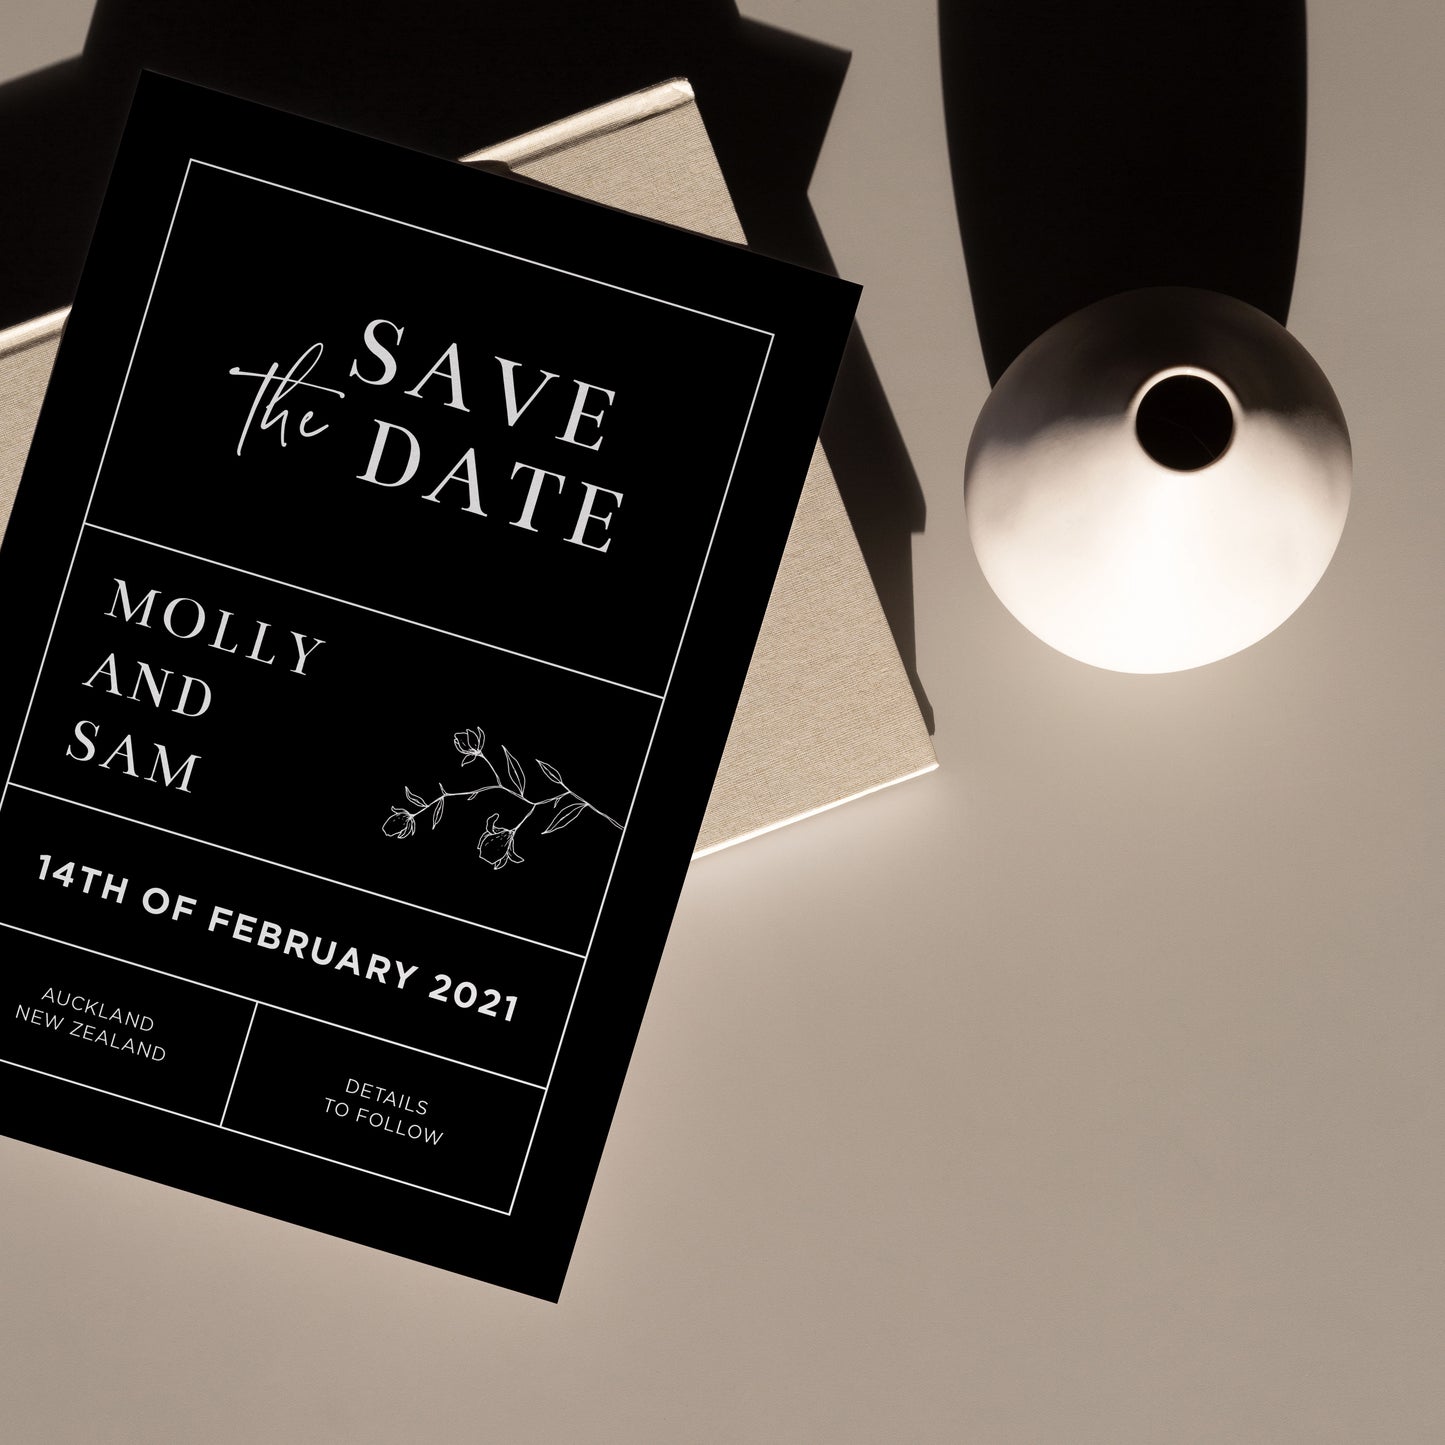 MOLLY SAVE THE DATE